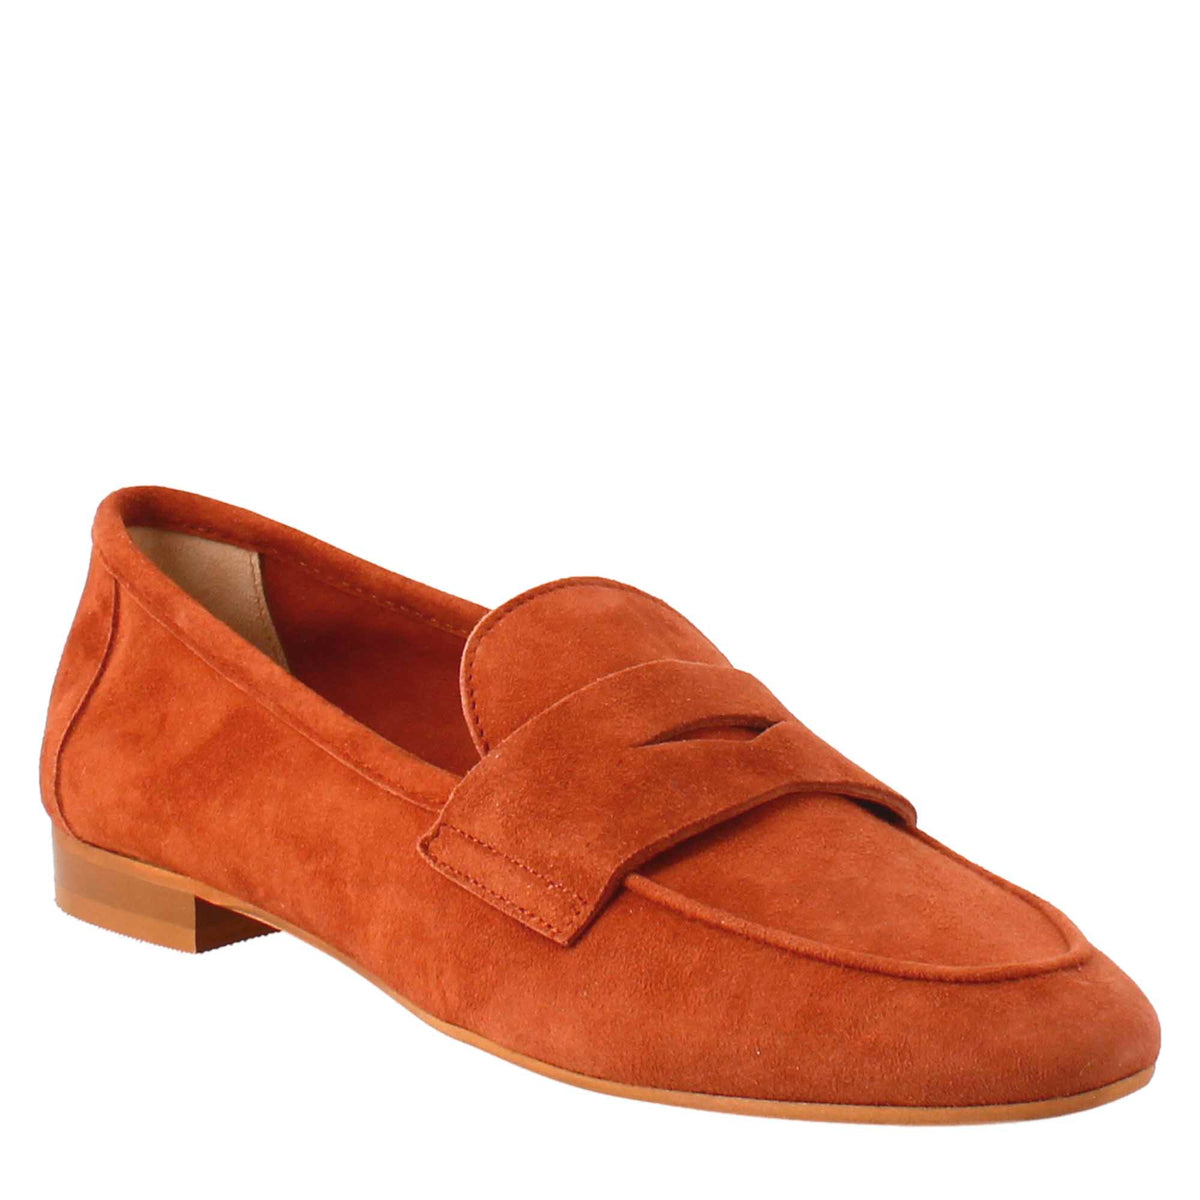 Handmade women's moccasin in tan-colored suede.